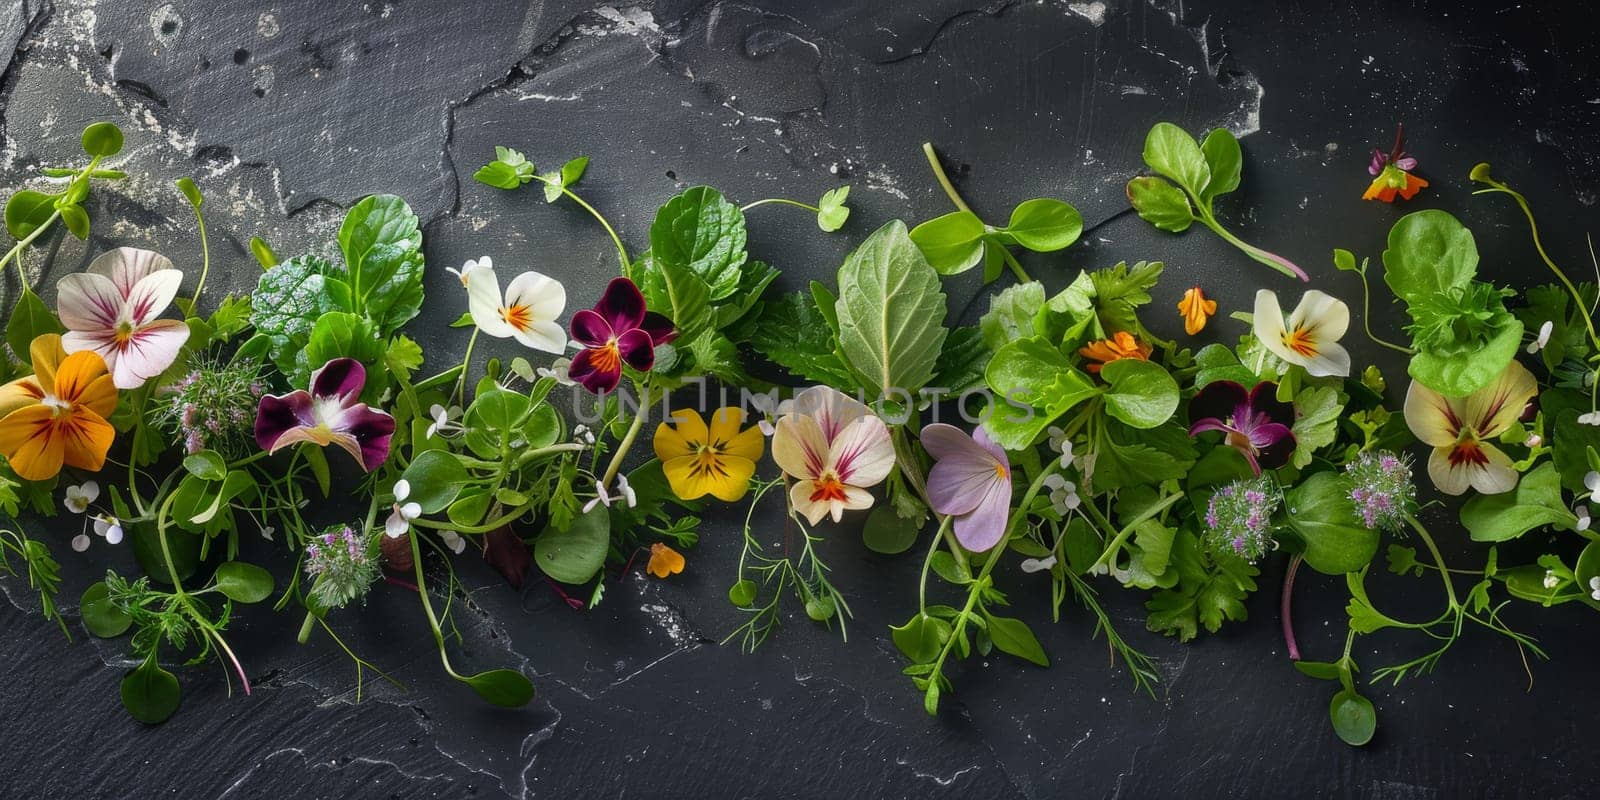 Garnishes and decorations used in gourmet cuisine, such as microgreens, edible flowers, or delicate herb leaves by Kadula